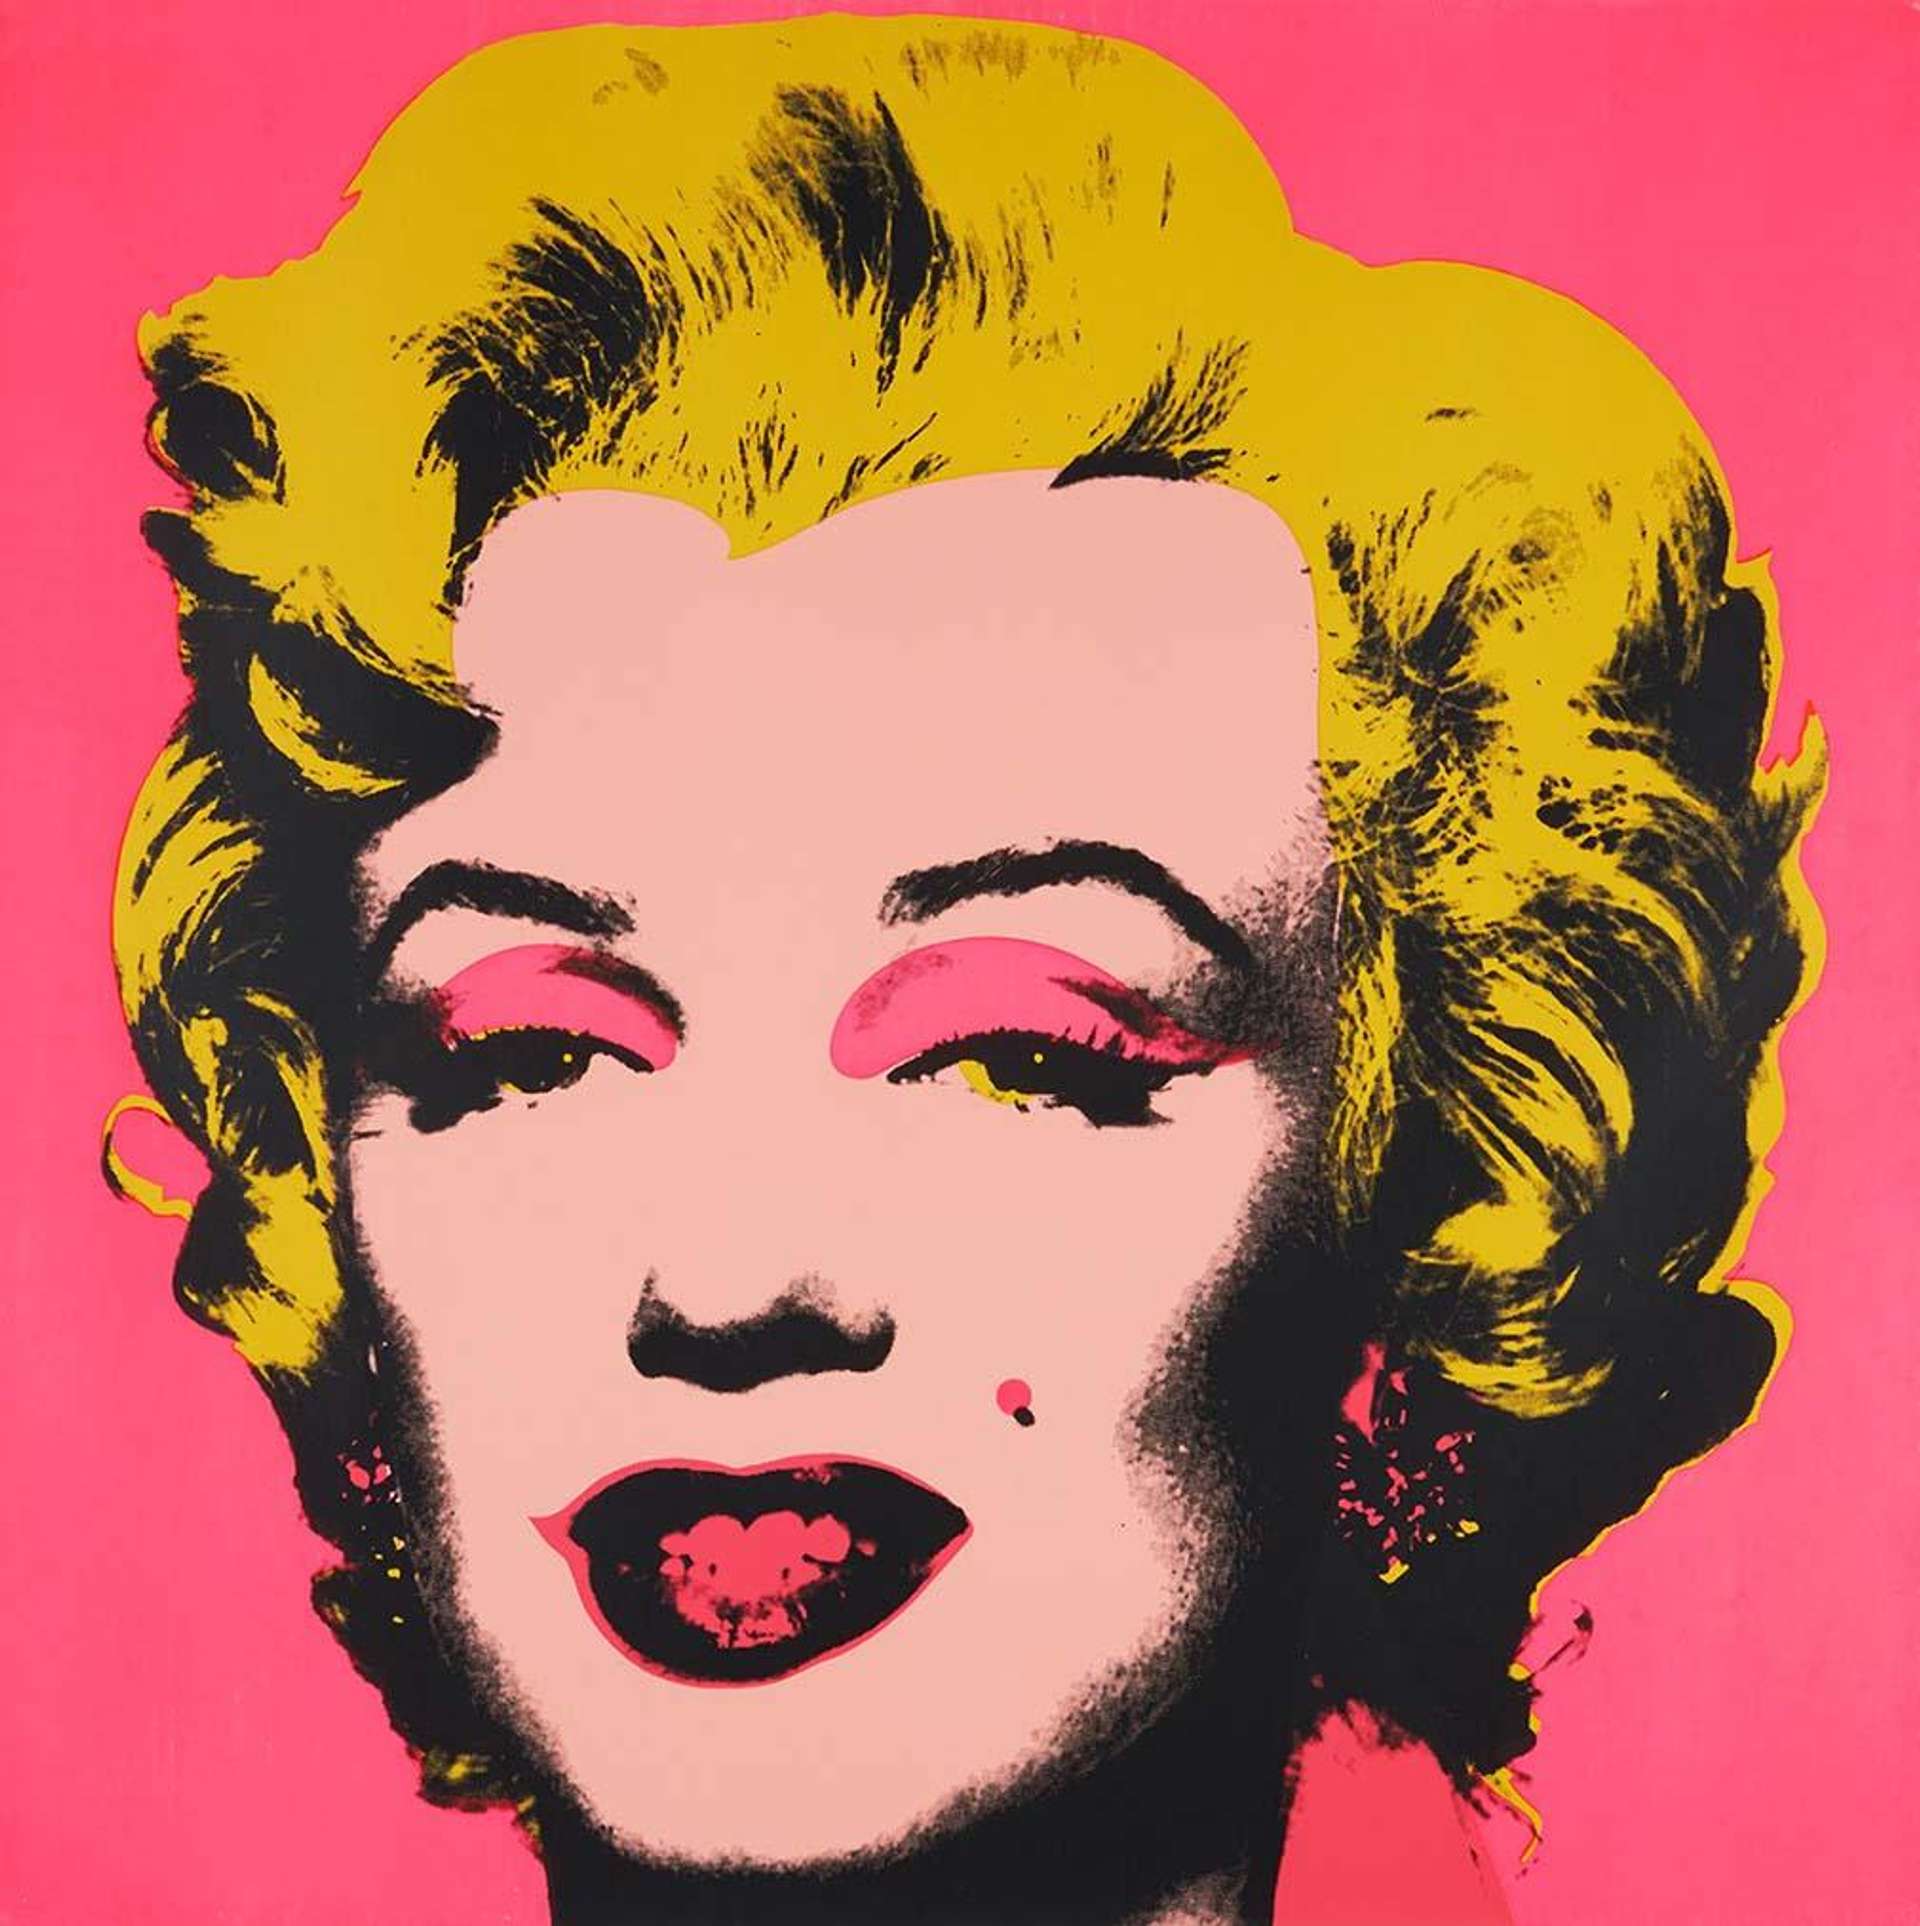 Pop art image of Marilyn Monroe with bright yellow hair on a bright pink background